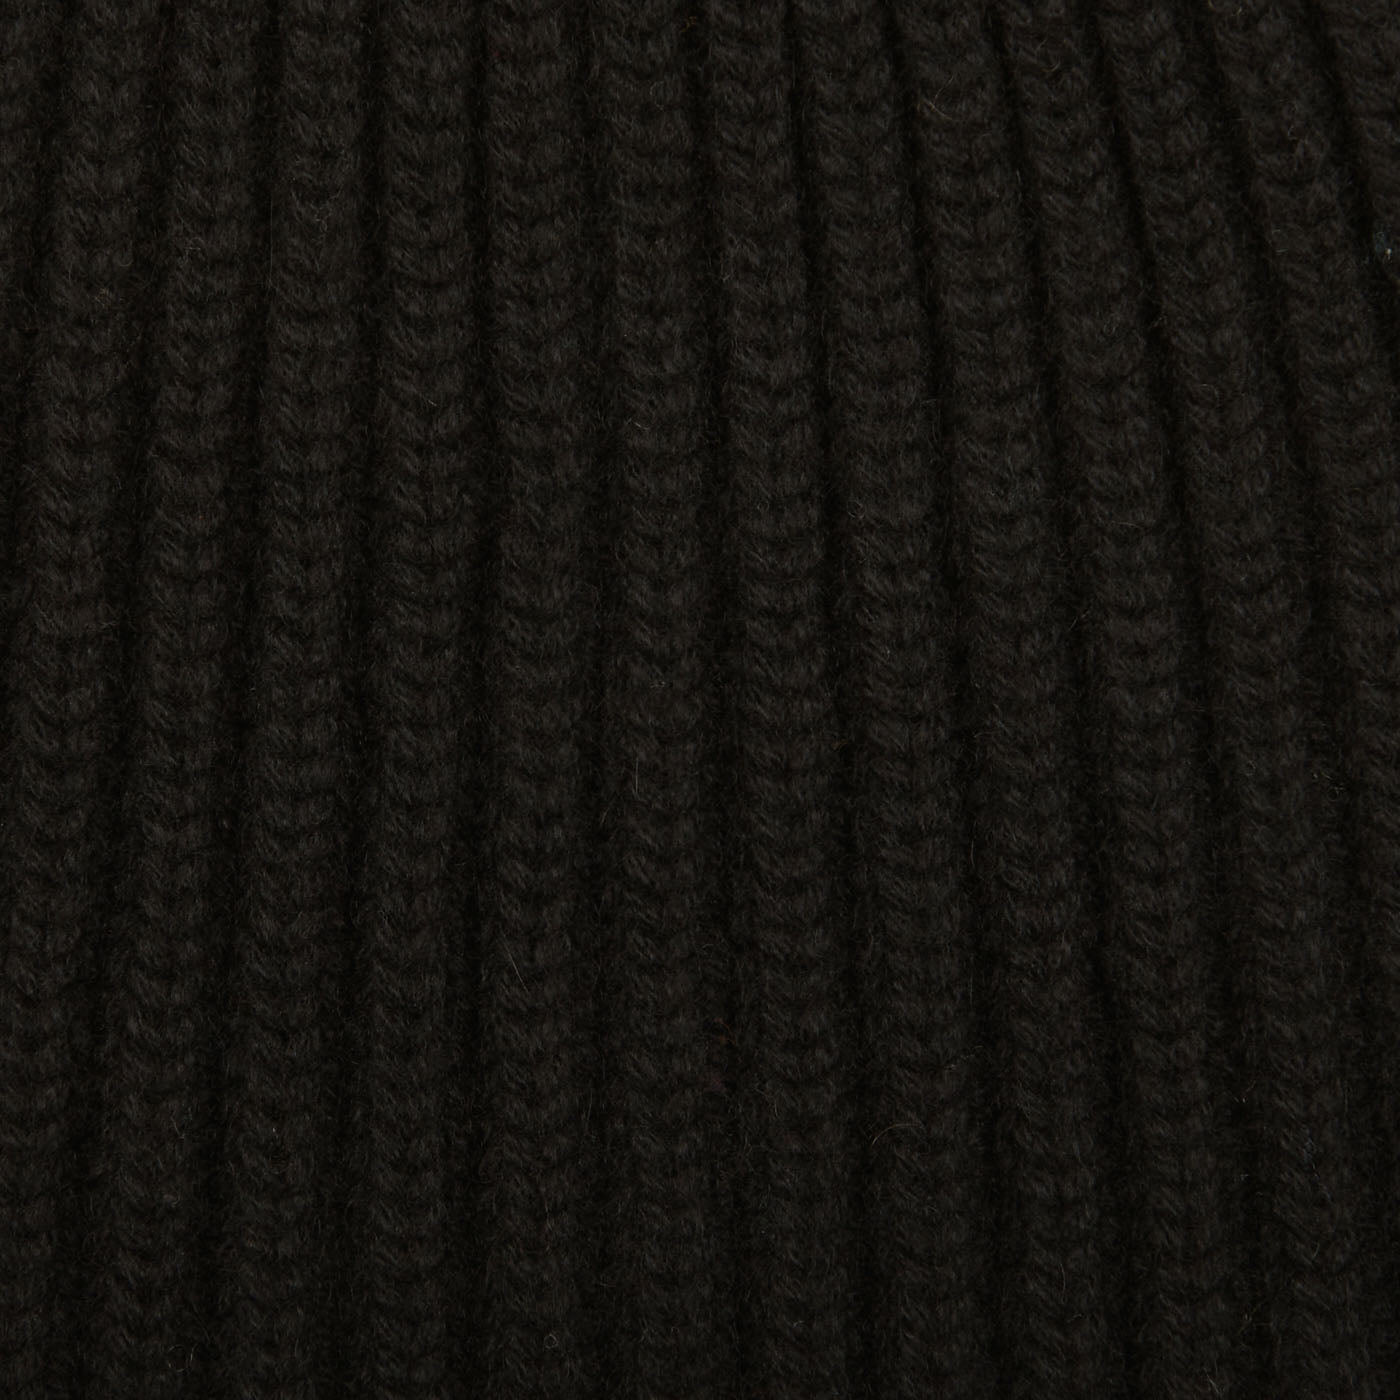 A close up of William Lockie's Black Cashmere Ribbed Short Beanie, Scotland's finest solid black ribbed beanie.